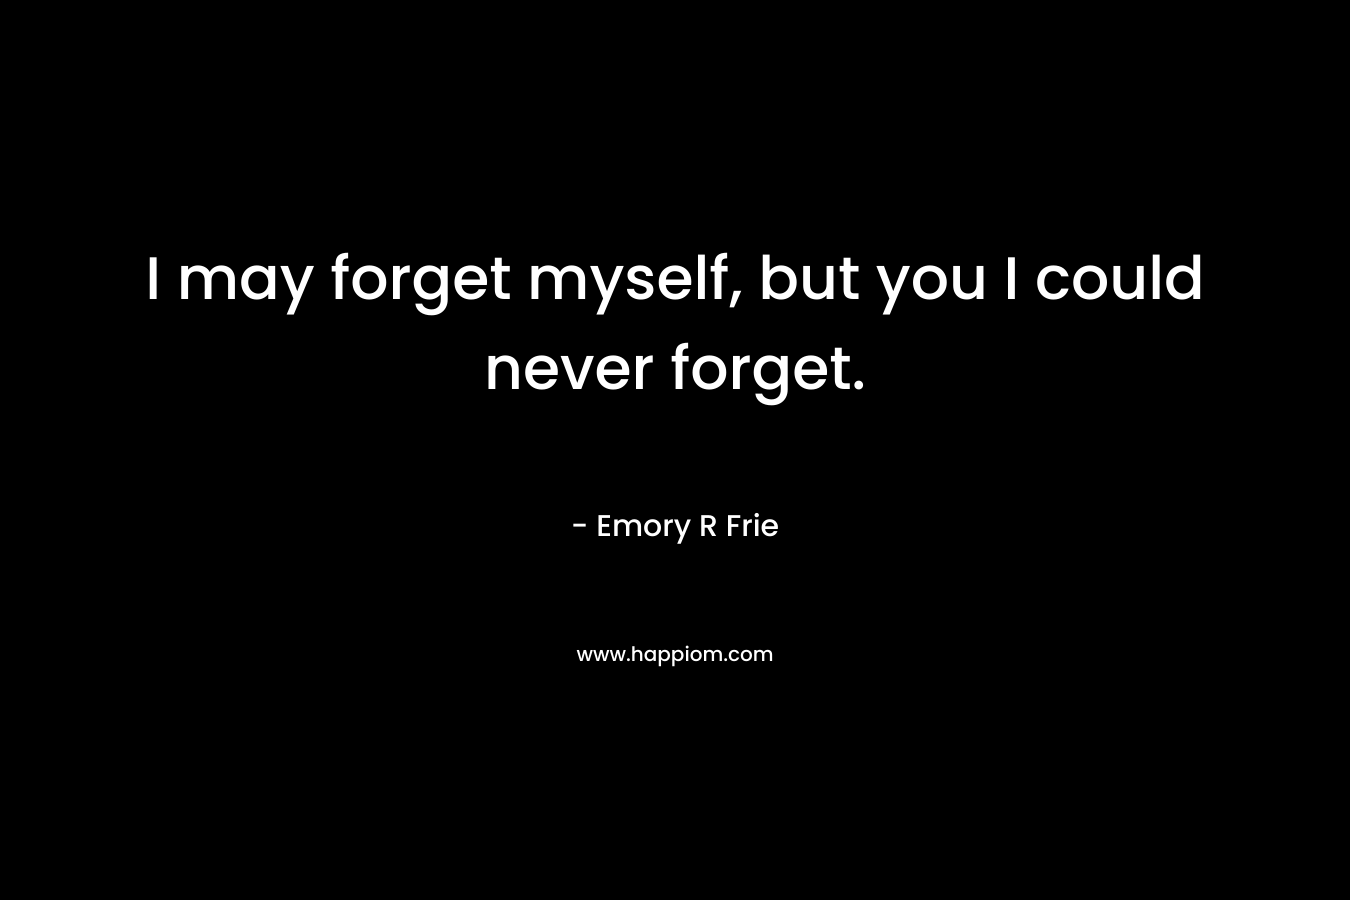 I may forget myself, but you I could never forget.